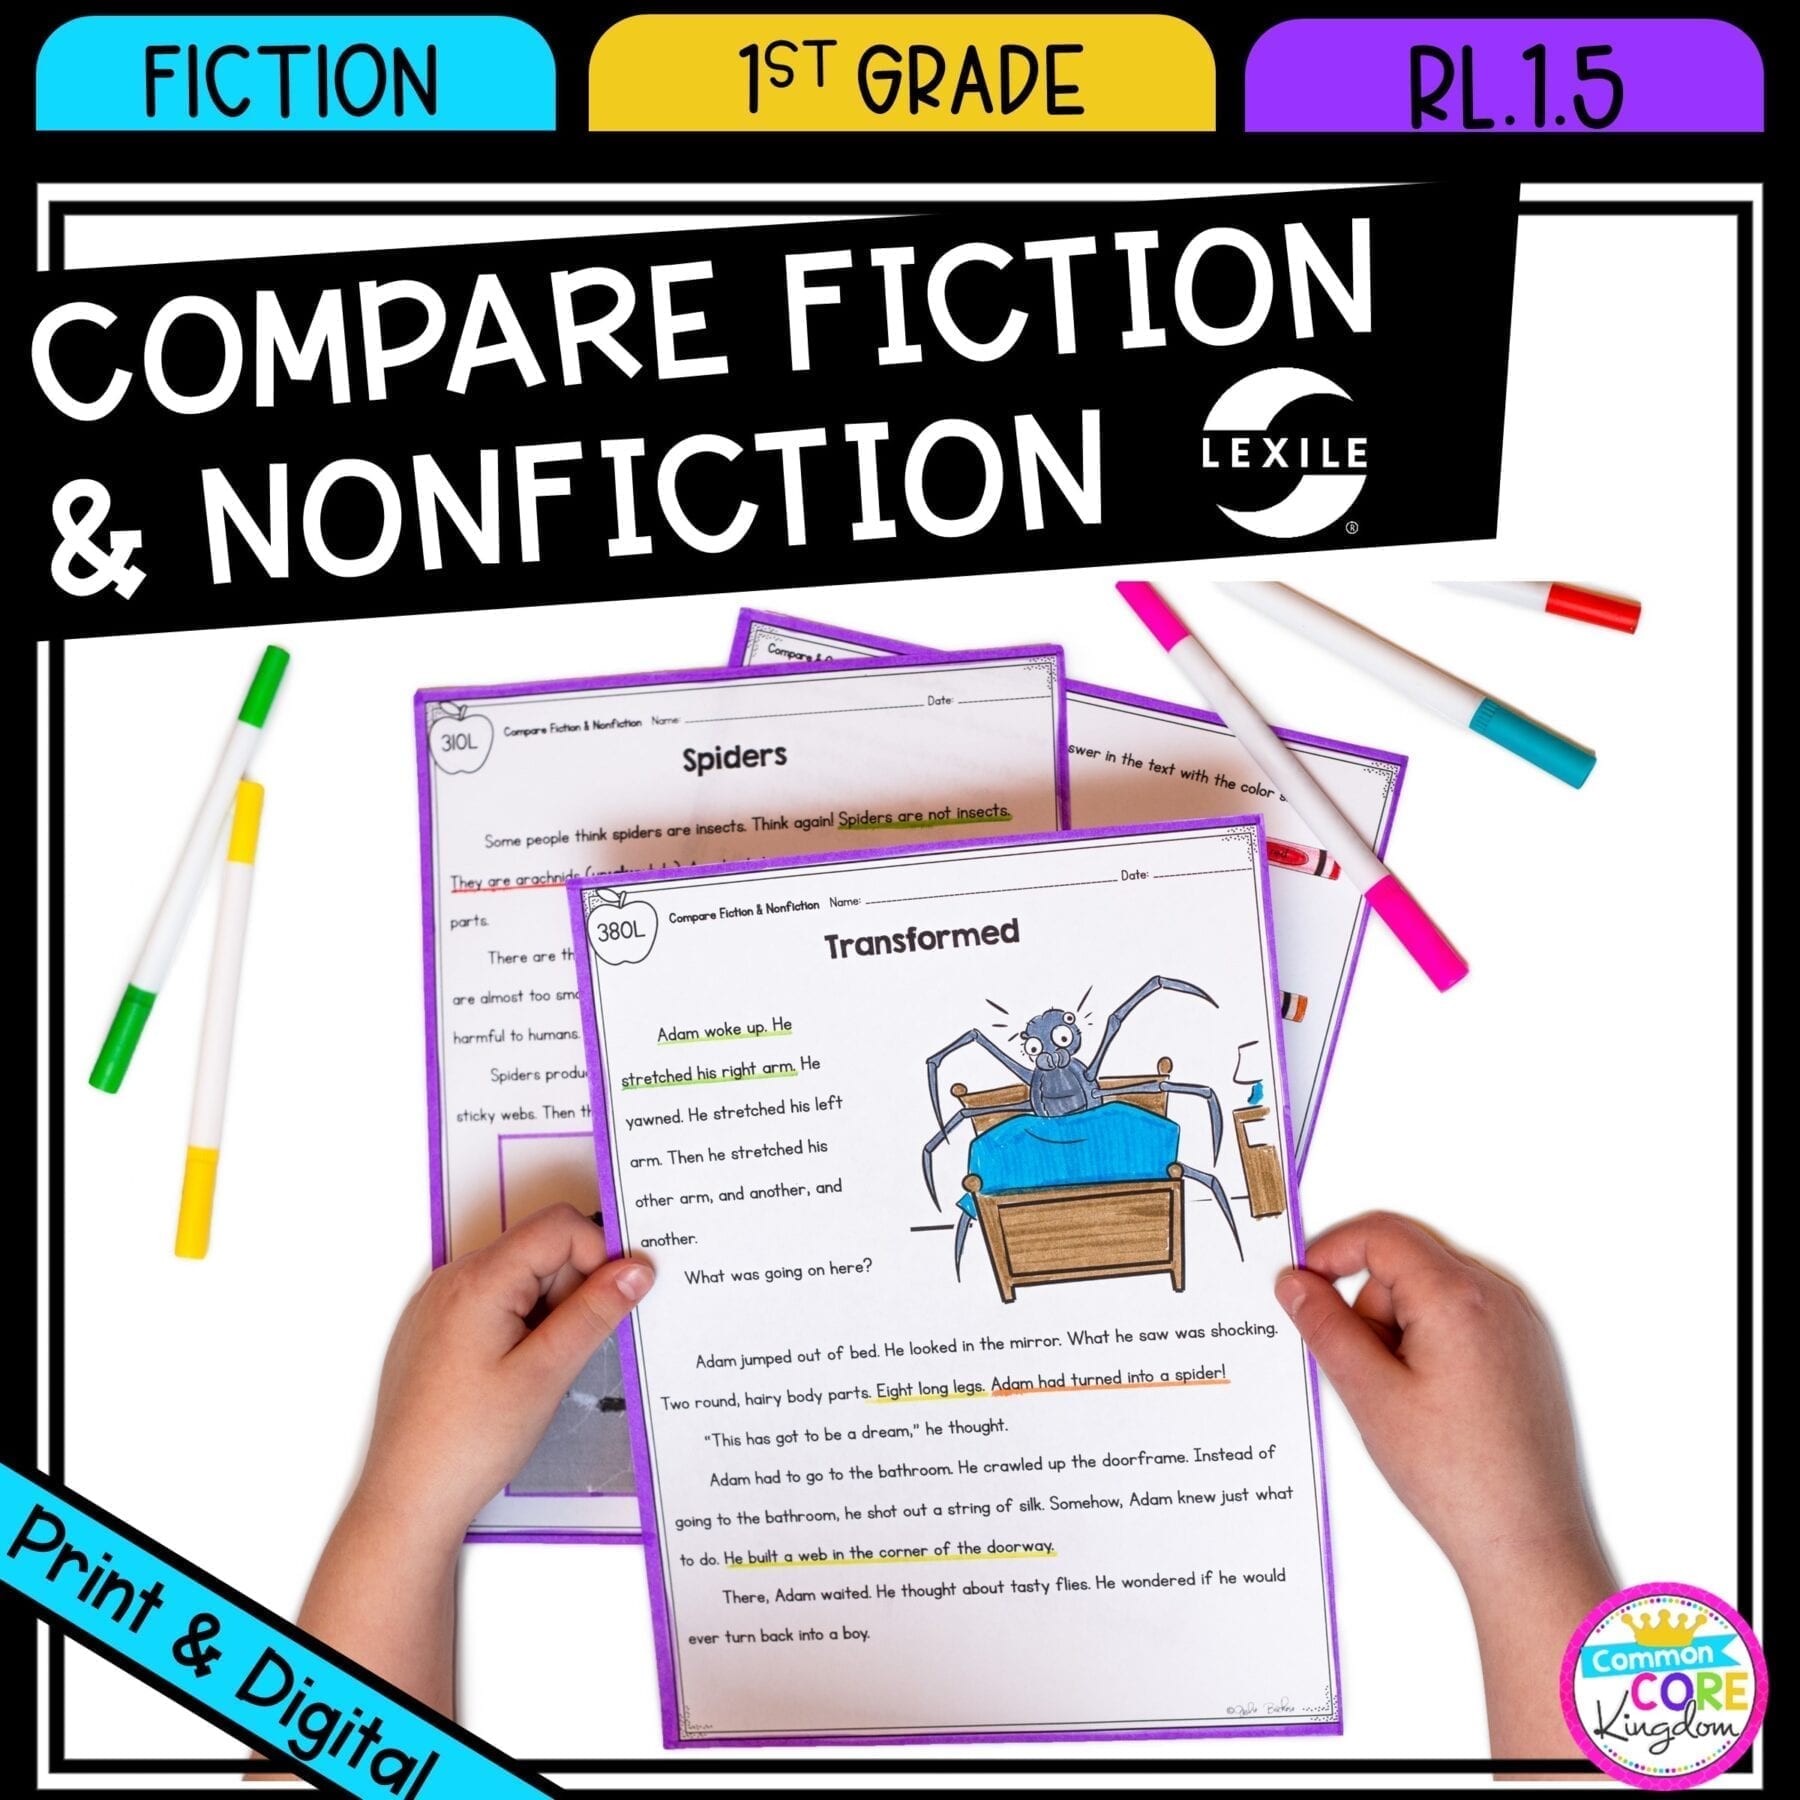 Compare Fiction and Nonfiction for 1st grade cover showing printable and digital worksheets